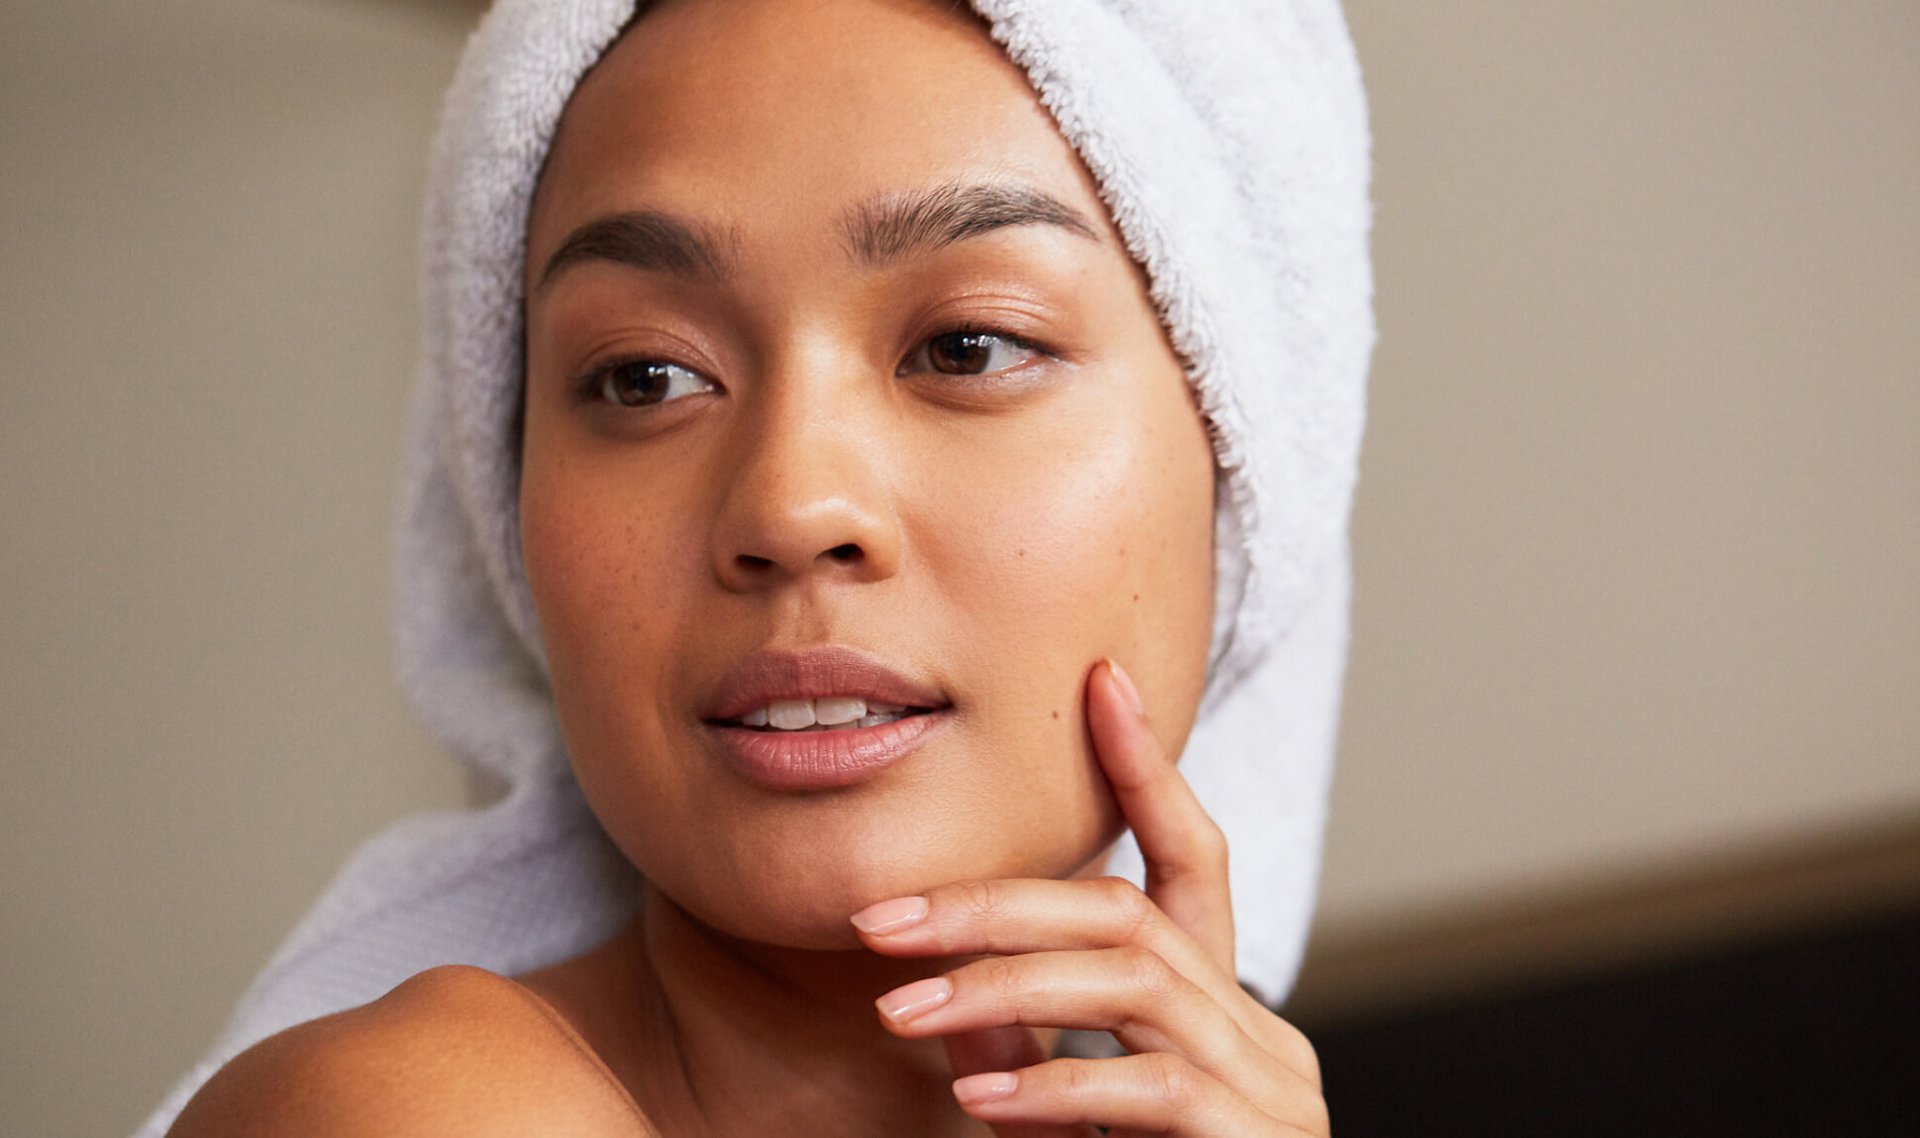 Unpoppable Pimples Are a Thing — Here’s What You Need to Know 